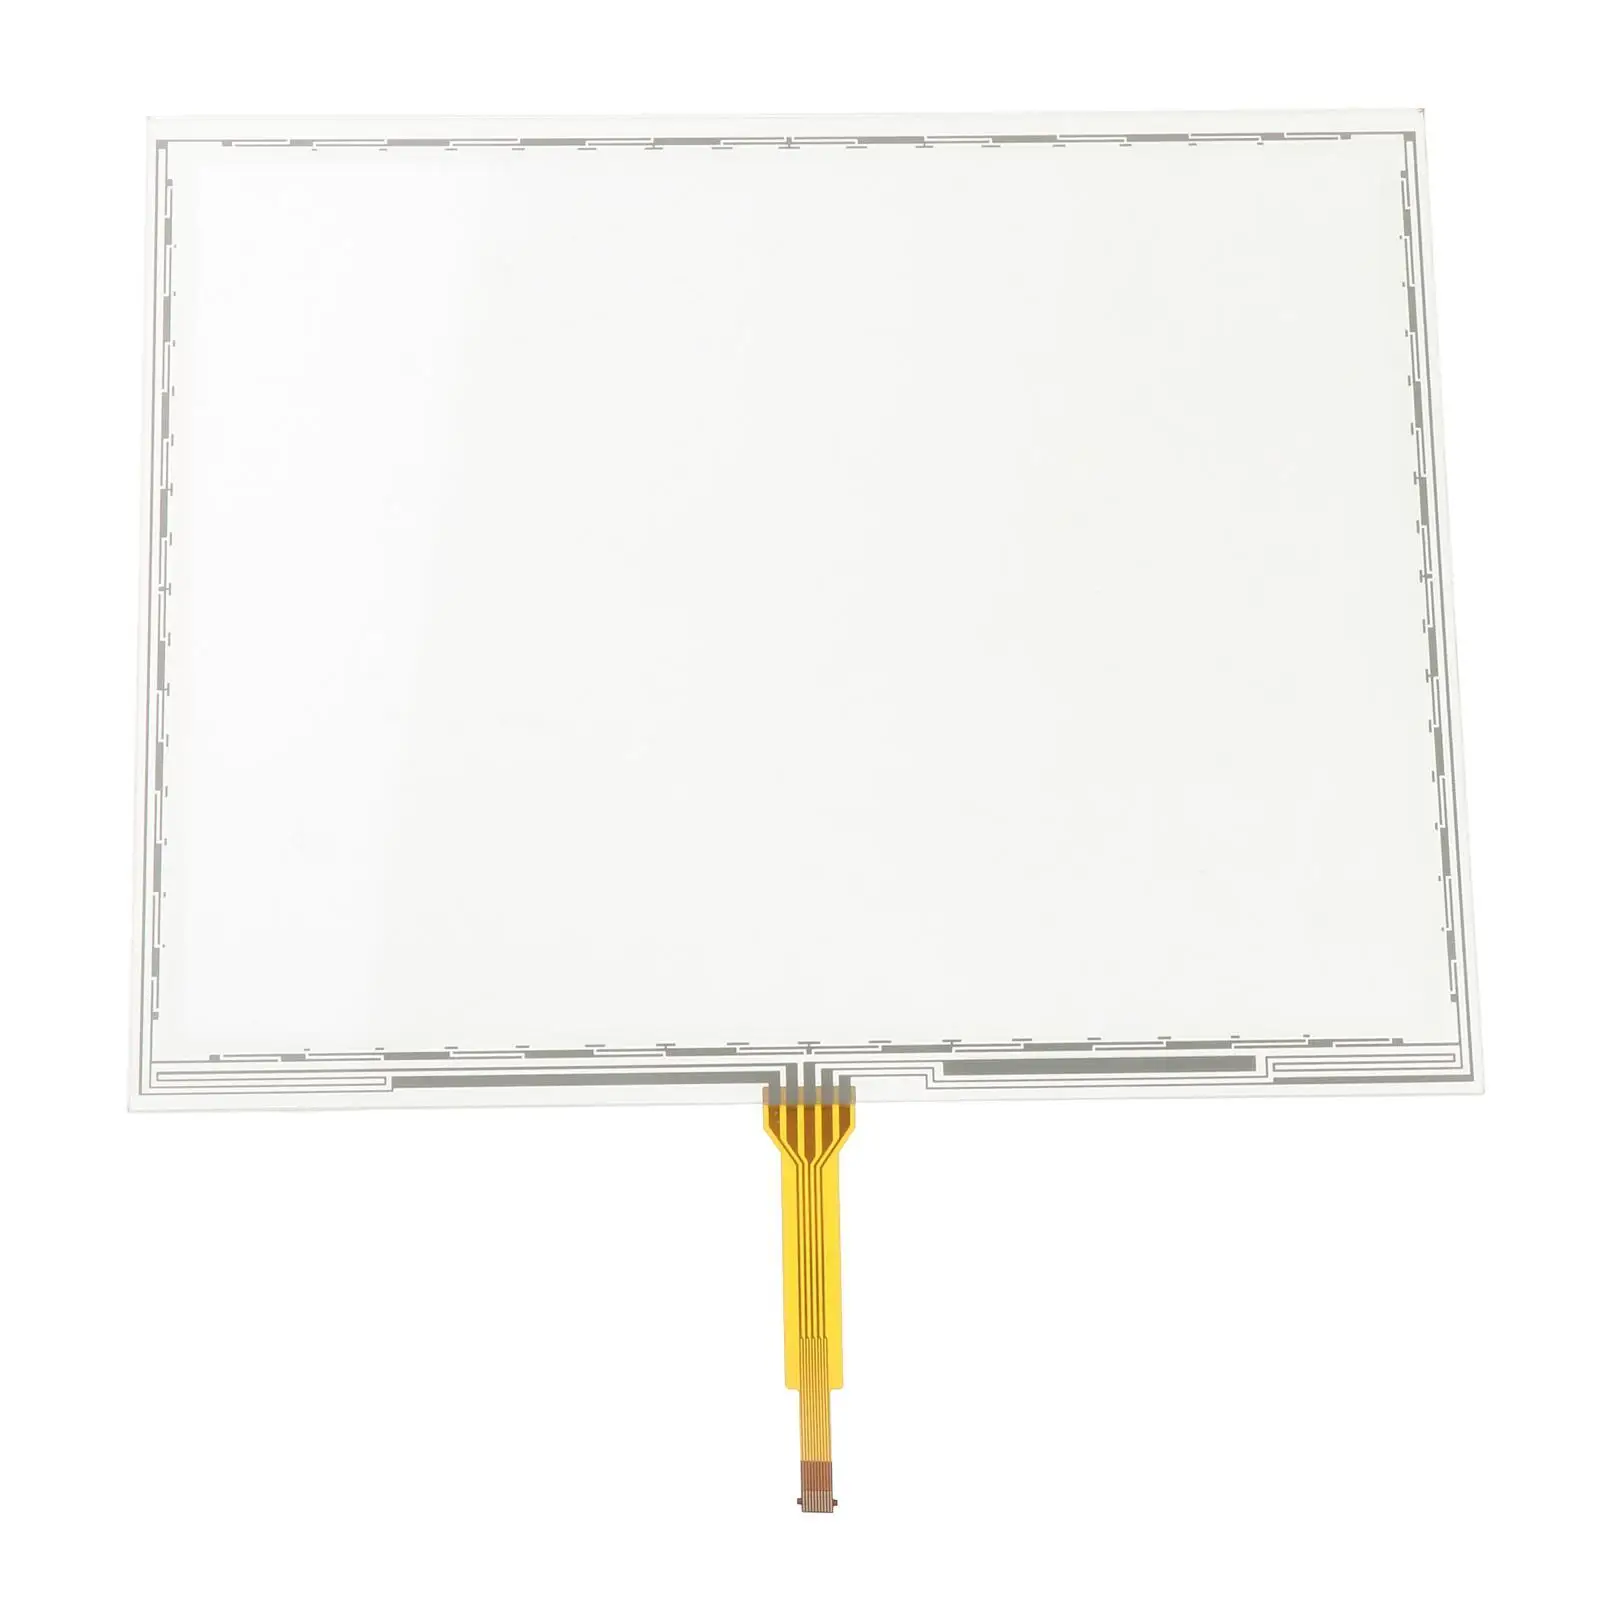 Touch Screen Panel Fpc-863Ne LCD Display Panel 23.1cmx18.2cm for 4640 Repair Parts Reliable Direct Installation